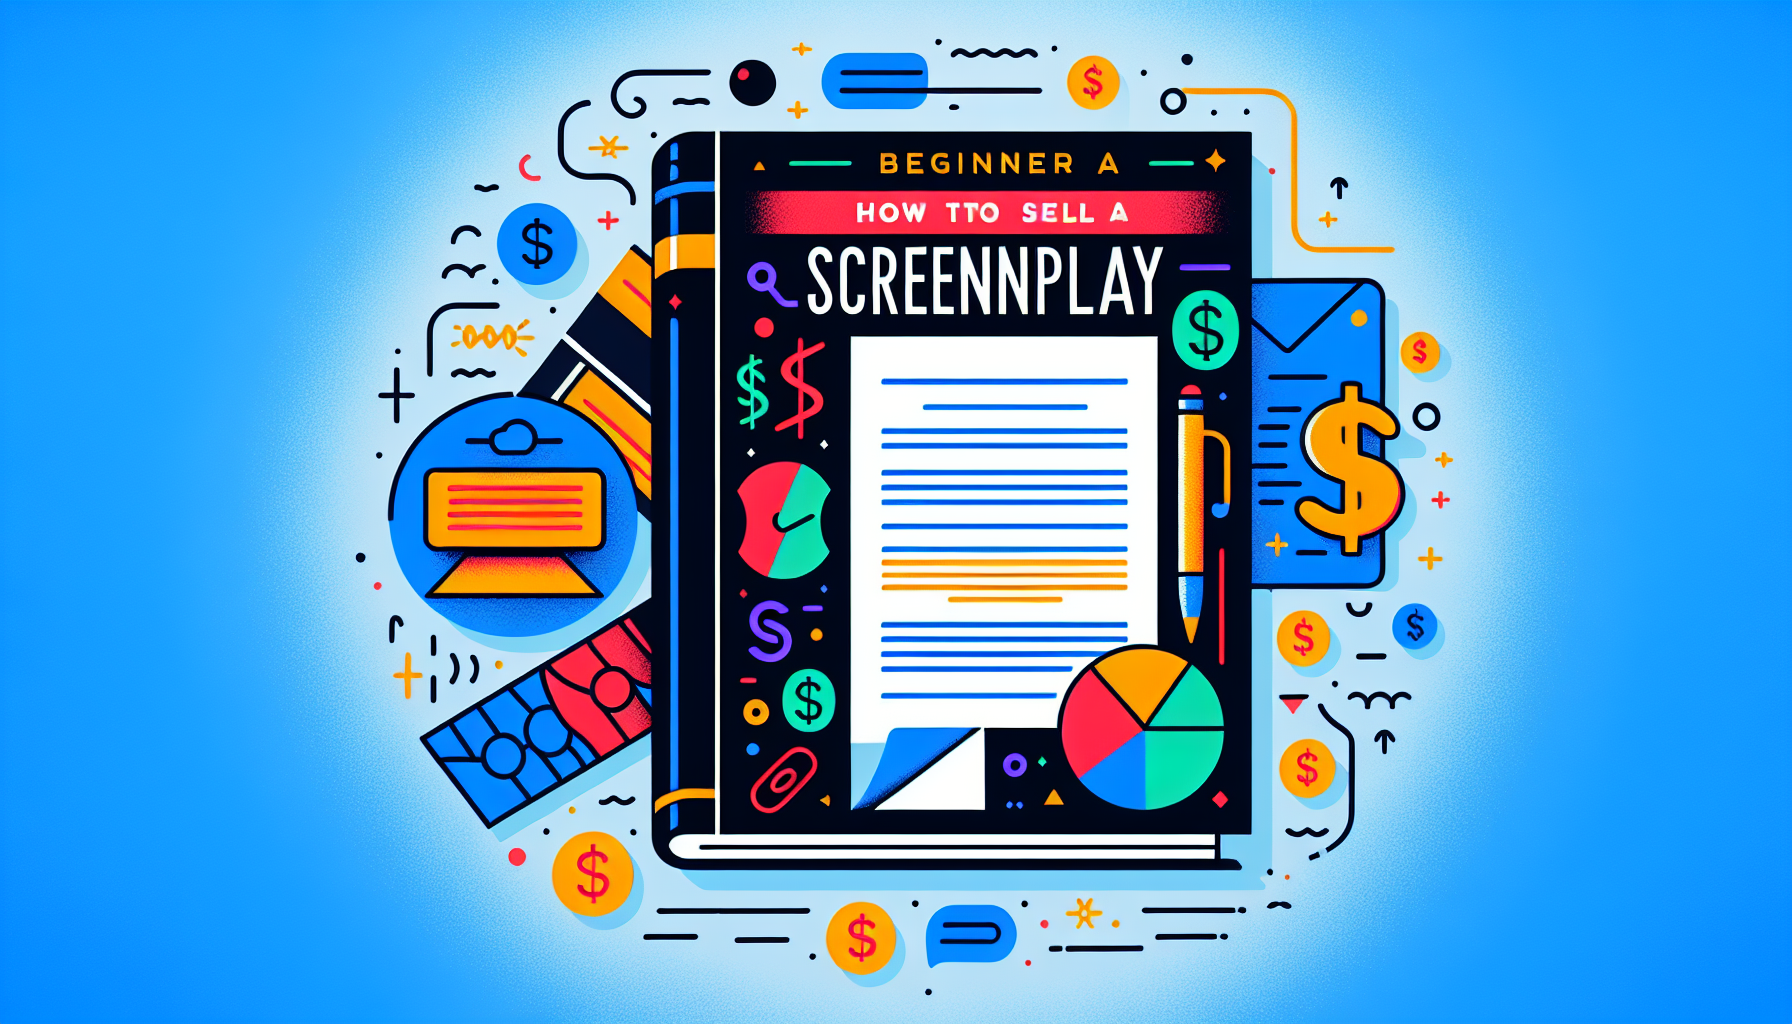 Illustrate a modern and colorful cover for a beginner's guide on how to sell a screenplay. The image should include symbols related to screenplays and selling – like a pristine script, a shiny dollar sign or a metaphorical representation of selling. Make it enlightening and inviting for novices, but remember to keep it text-free.